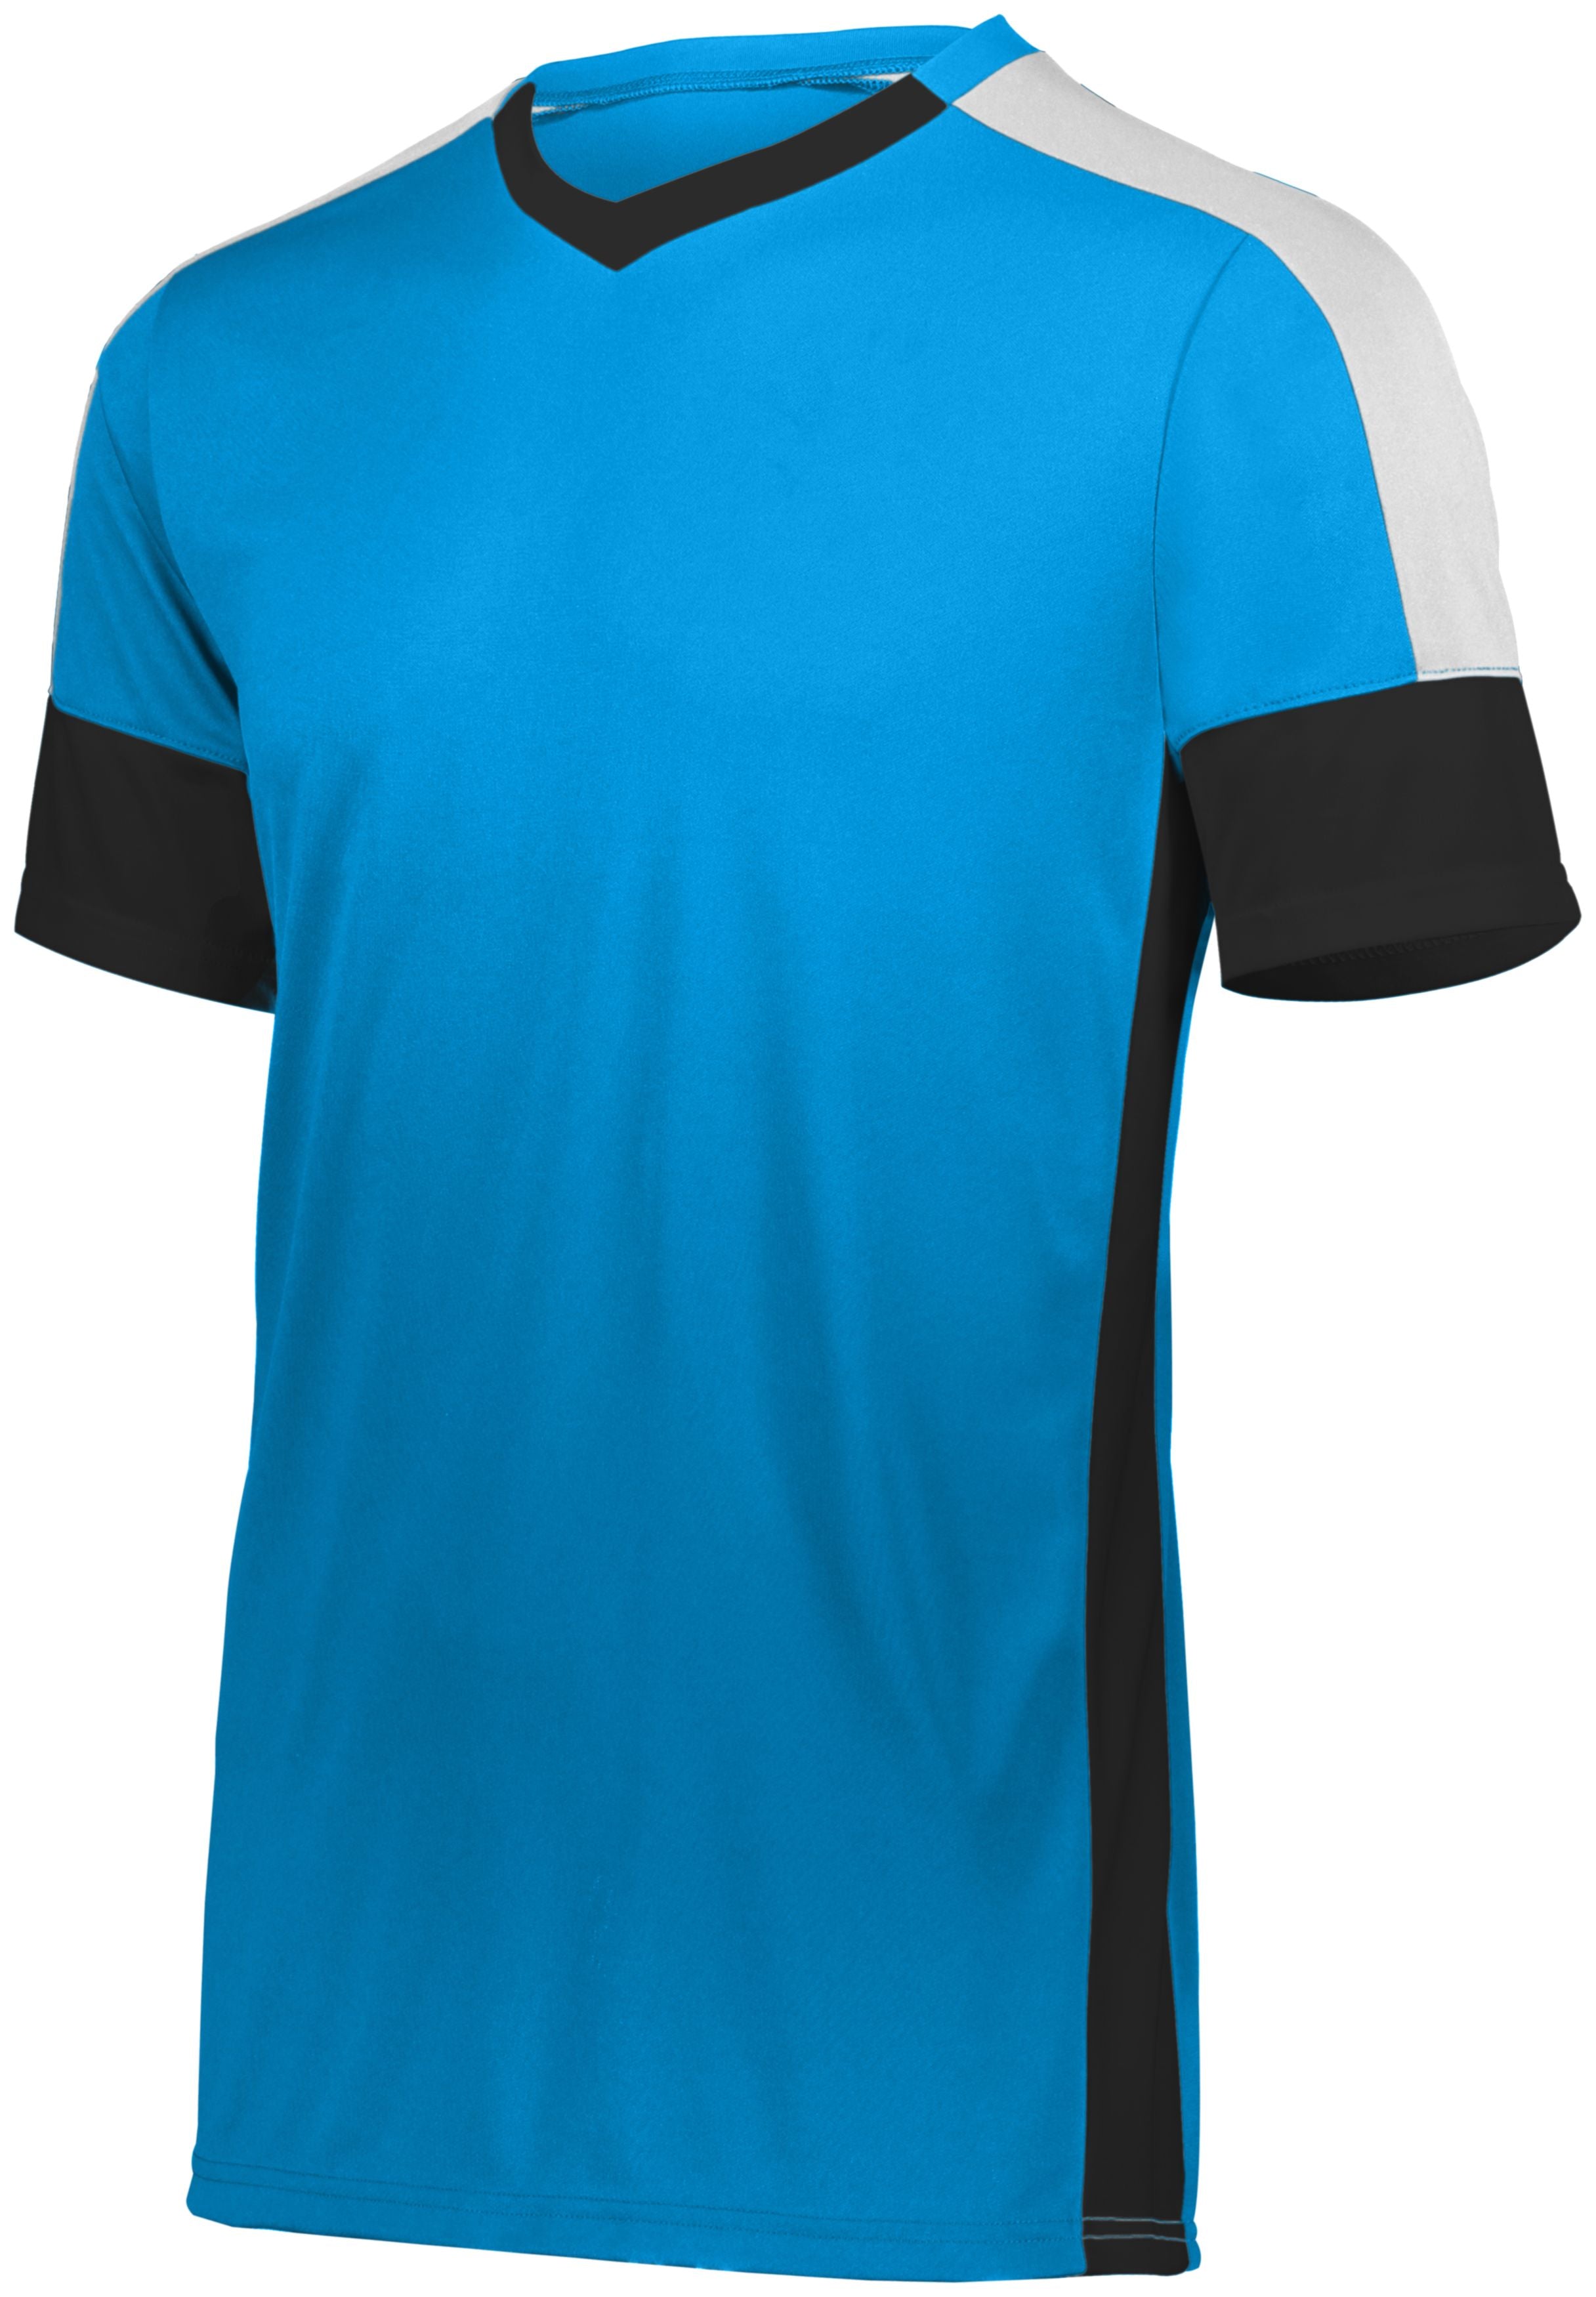 High 5 Youth Wembley Soccer Jersey in Power Blue/Black/White  -Part of the Youth, Youth-Jersey, High5-Products, Soccer, Shirts, All-Sports-1 product lines at KanaleyCreations.com